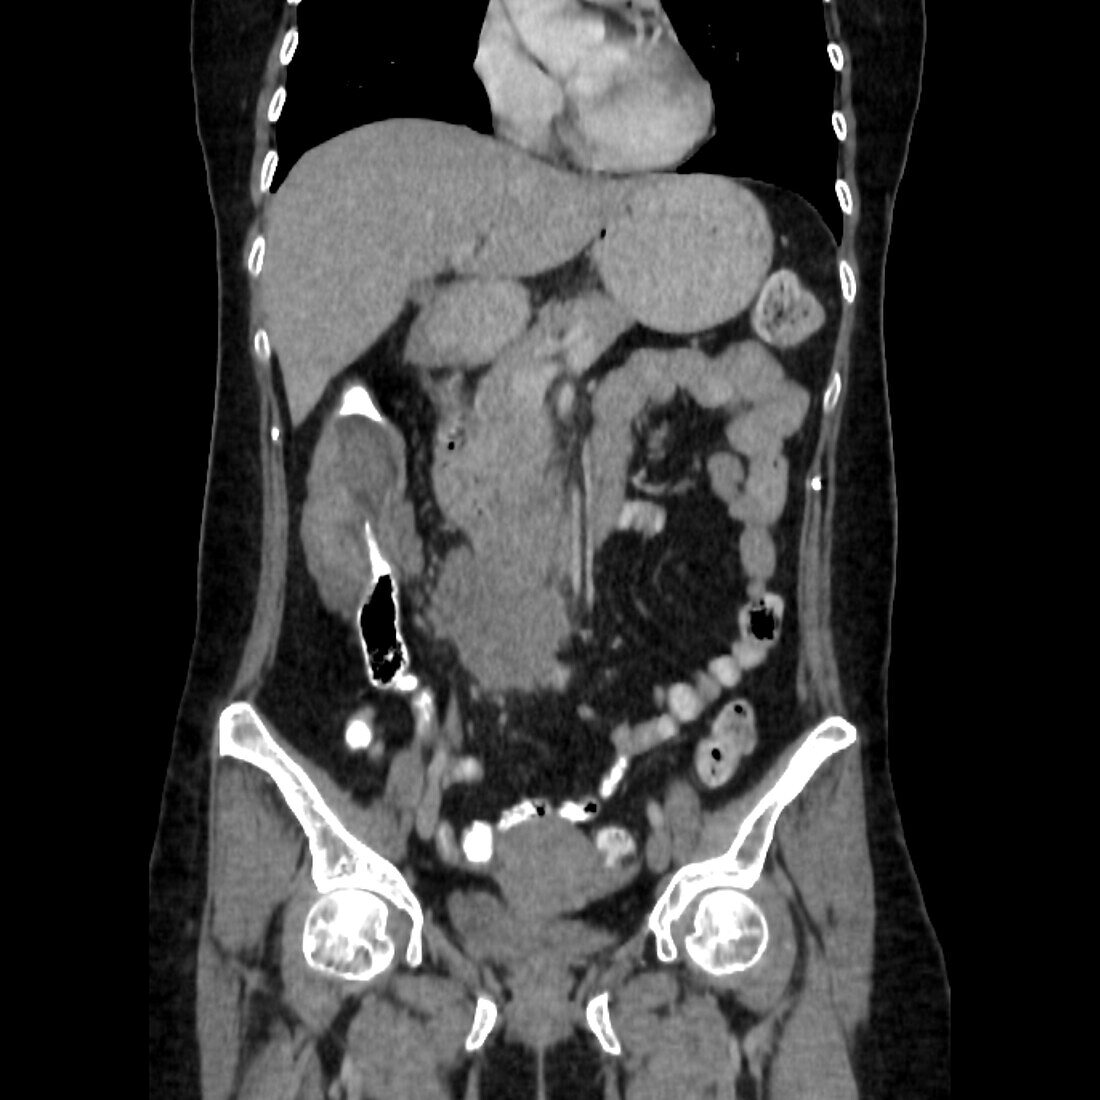 Intussusception of the intestines, CT scan